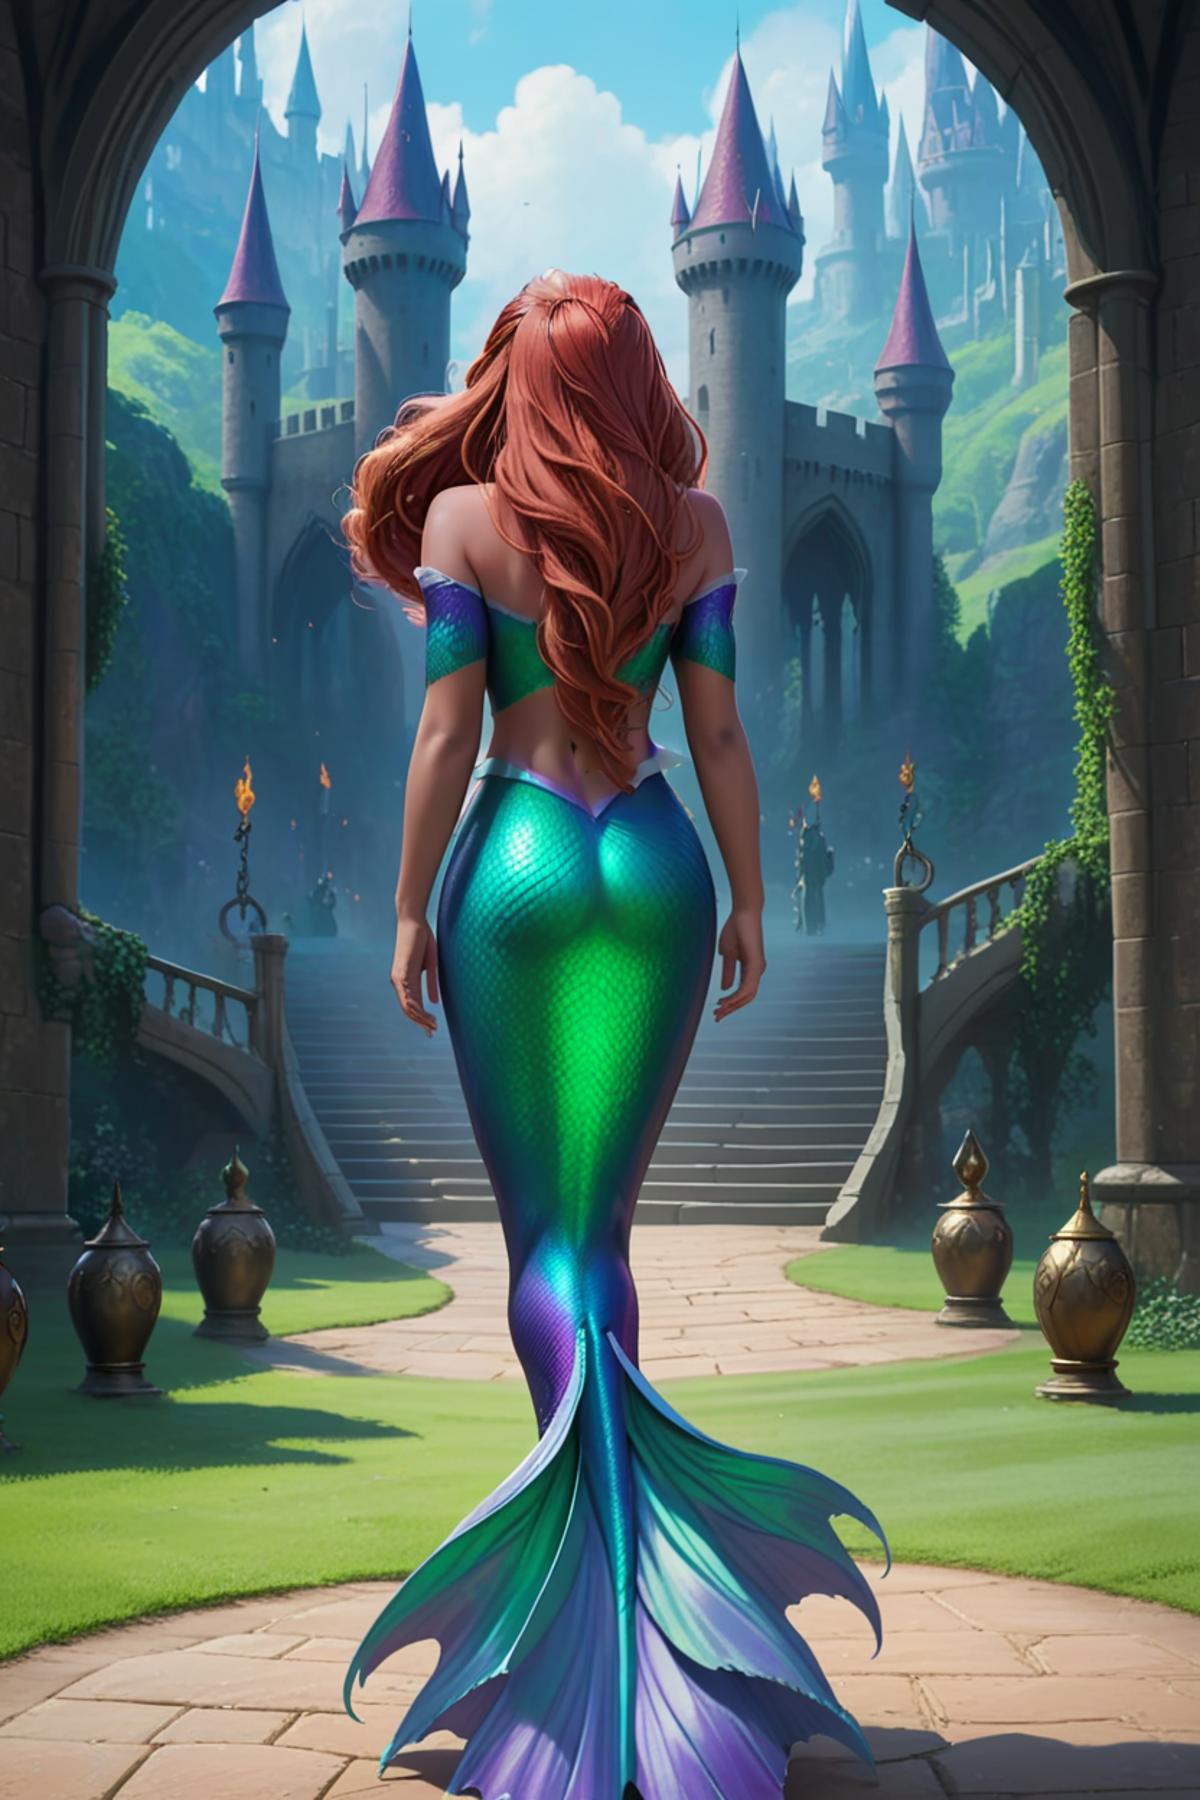 Ariel the Mermaid XL image by strategenblume